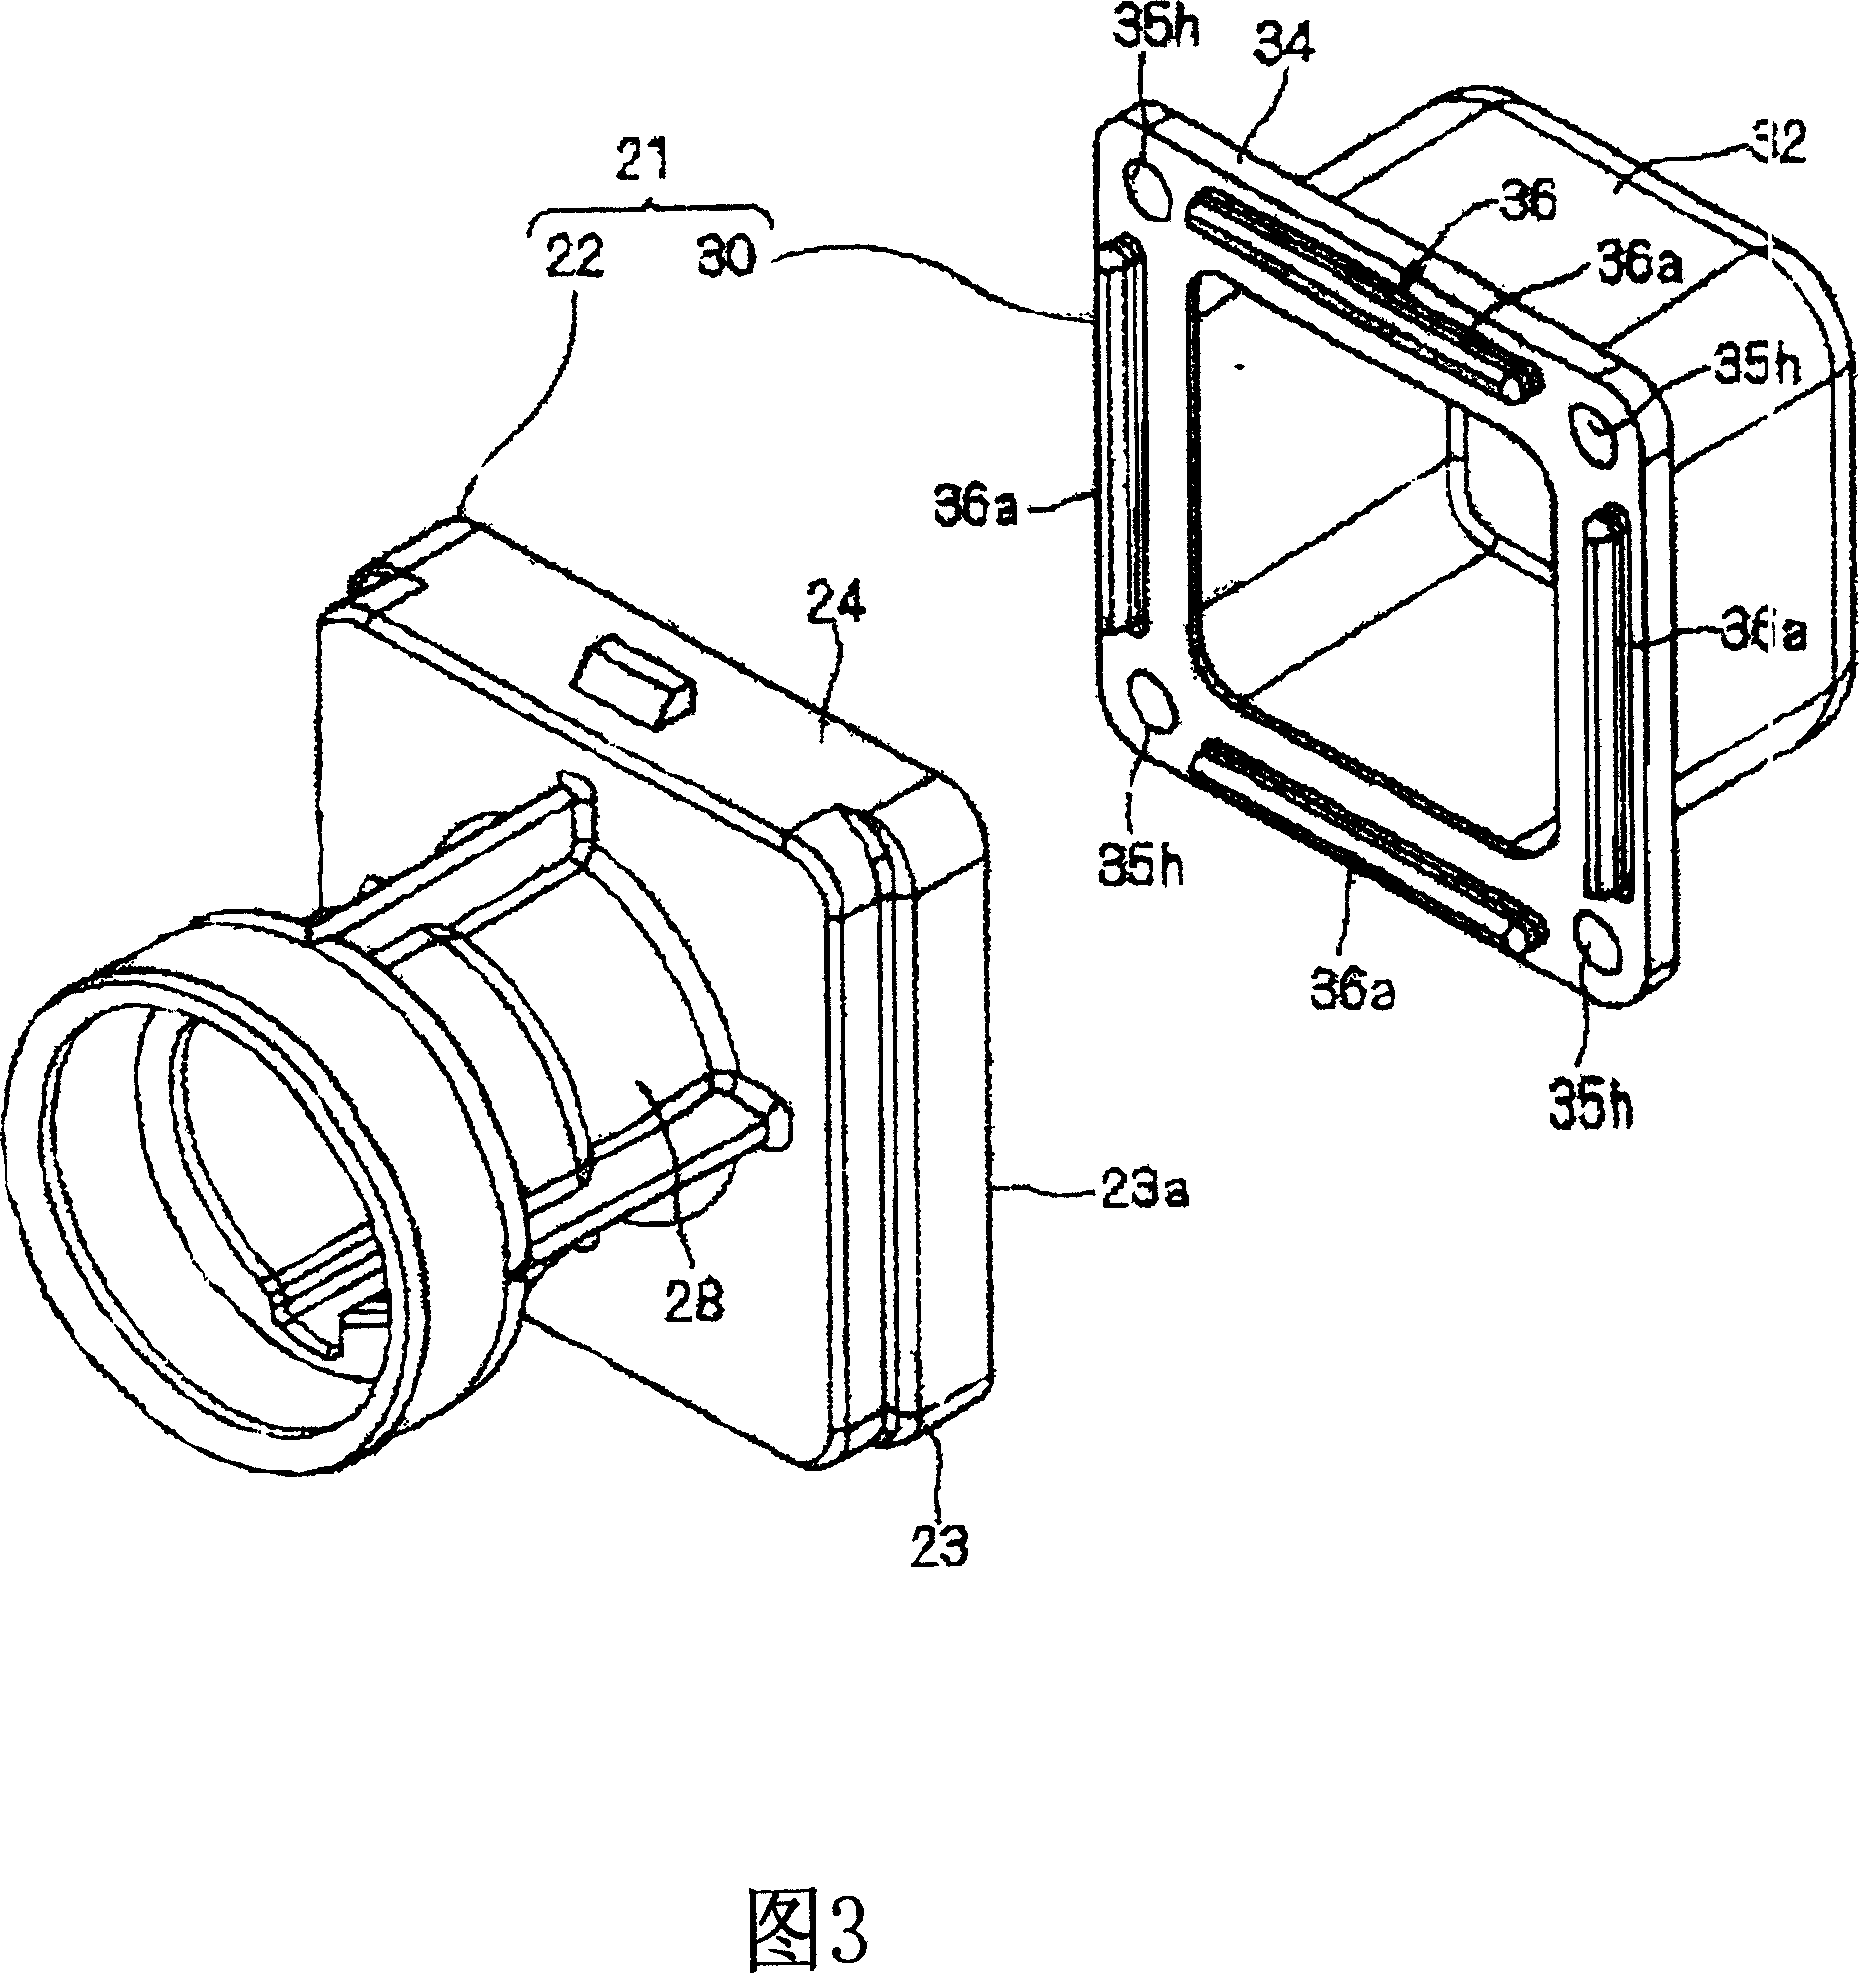 Waterproof case for in-vehicle camera